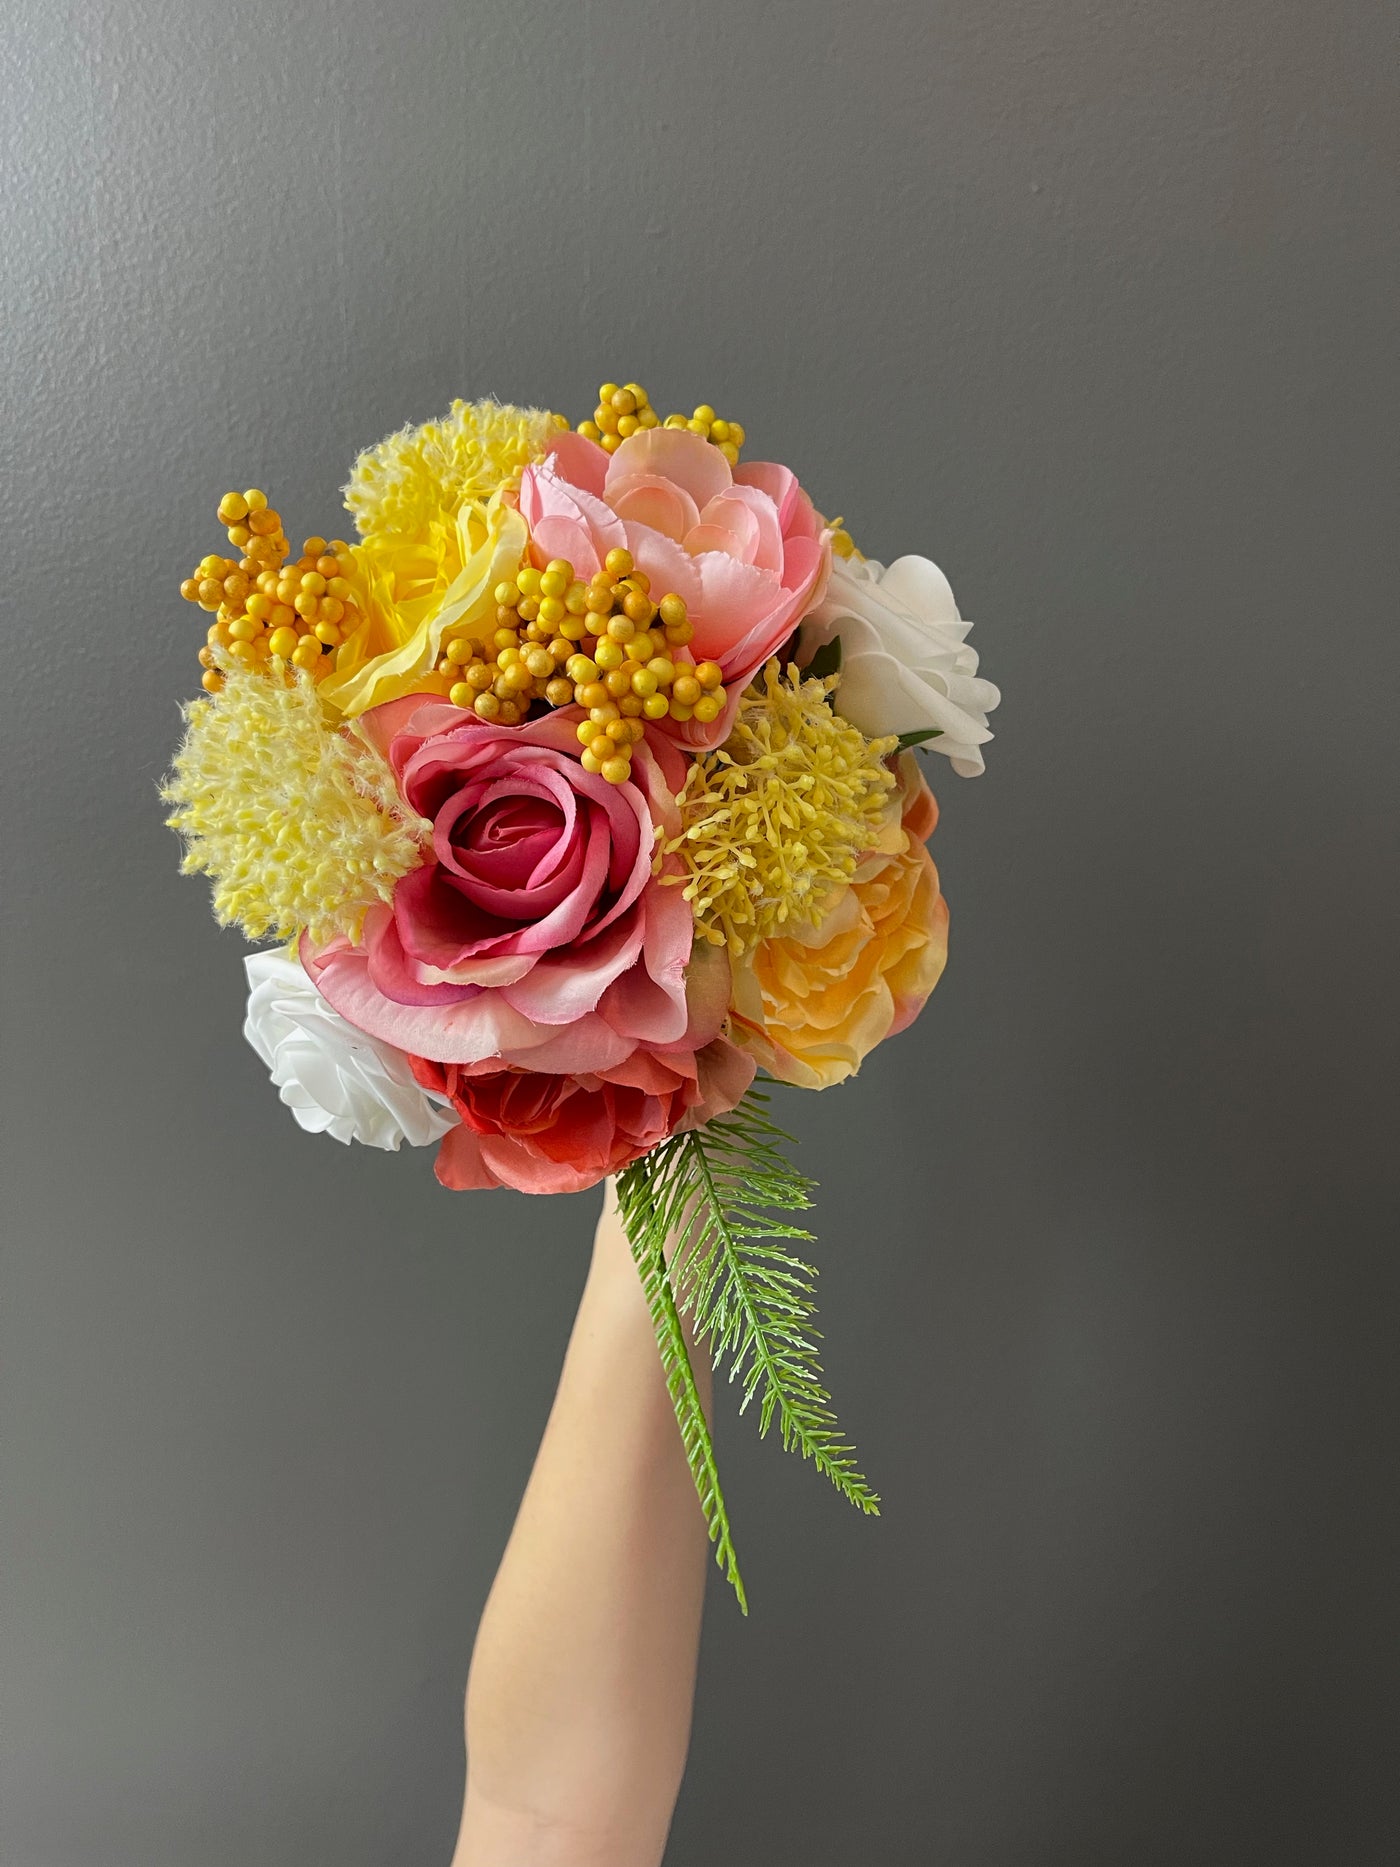 This warm summer collection features large pink and yellow peony blossoms which open gracefully next to custard hydrangeas, peach English roses, white globe dahlias, and yellow hypericum berries, and sprigs of bright green fern.